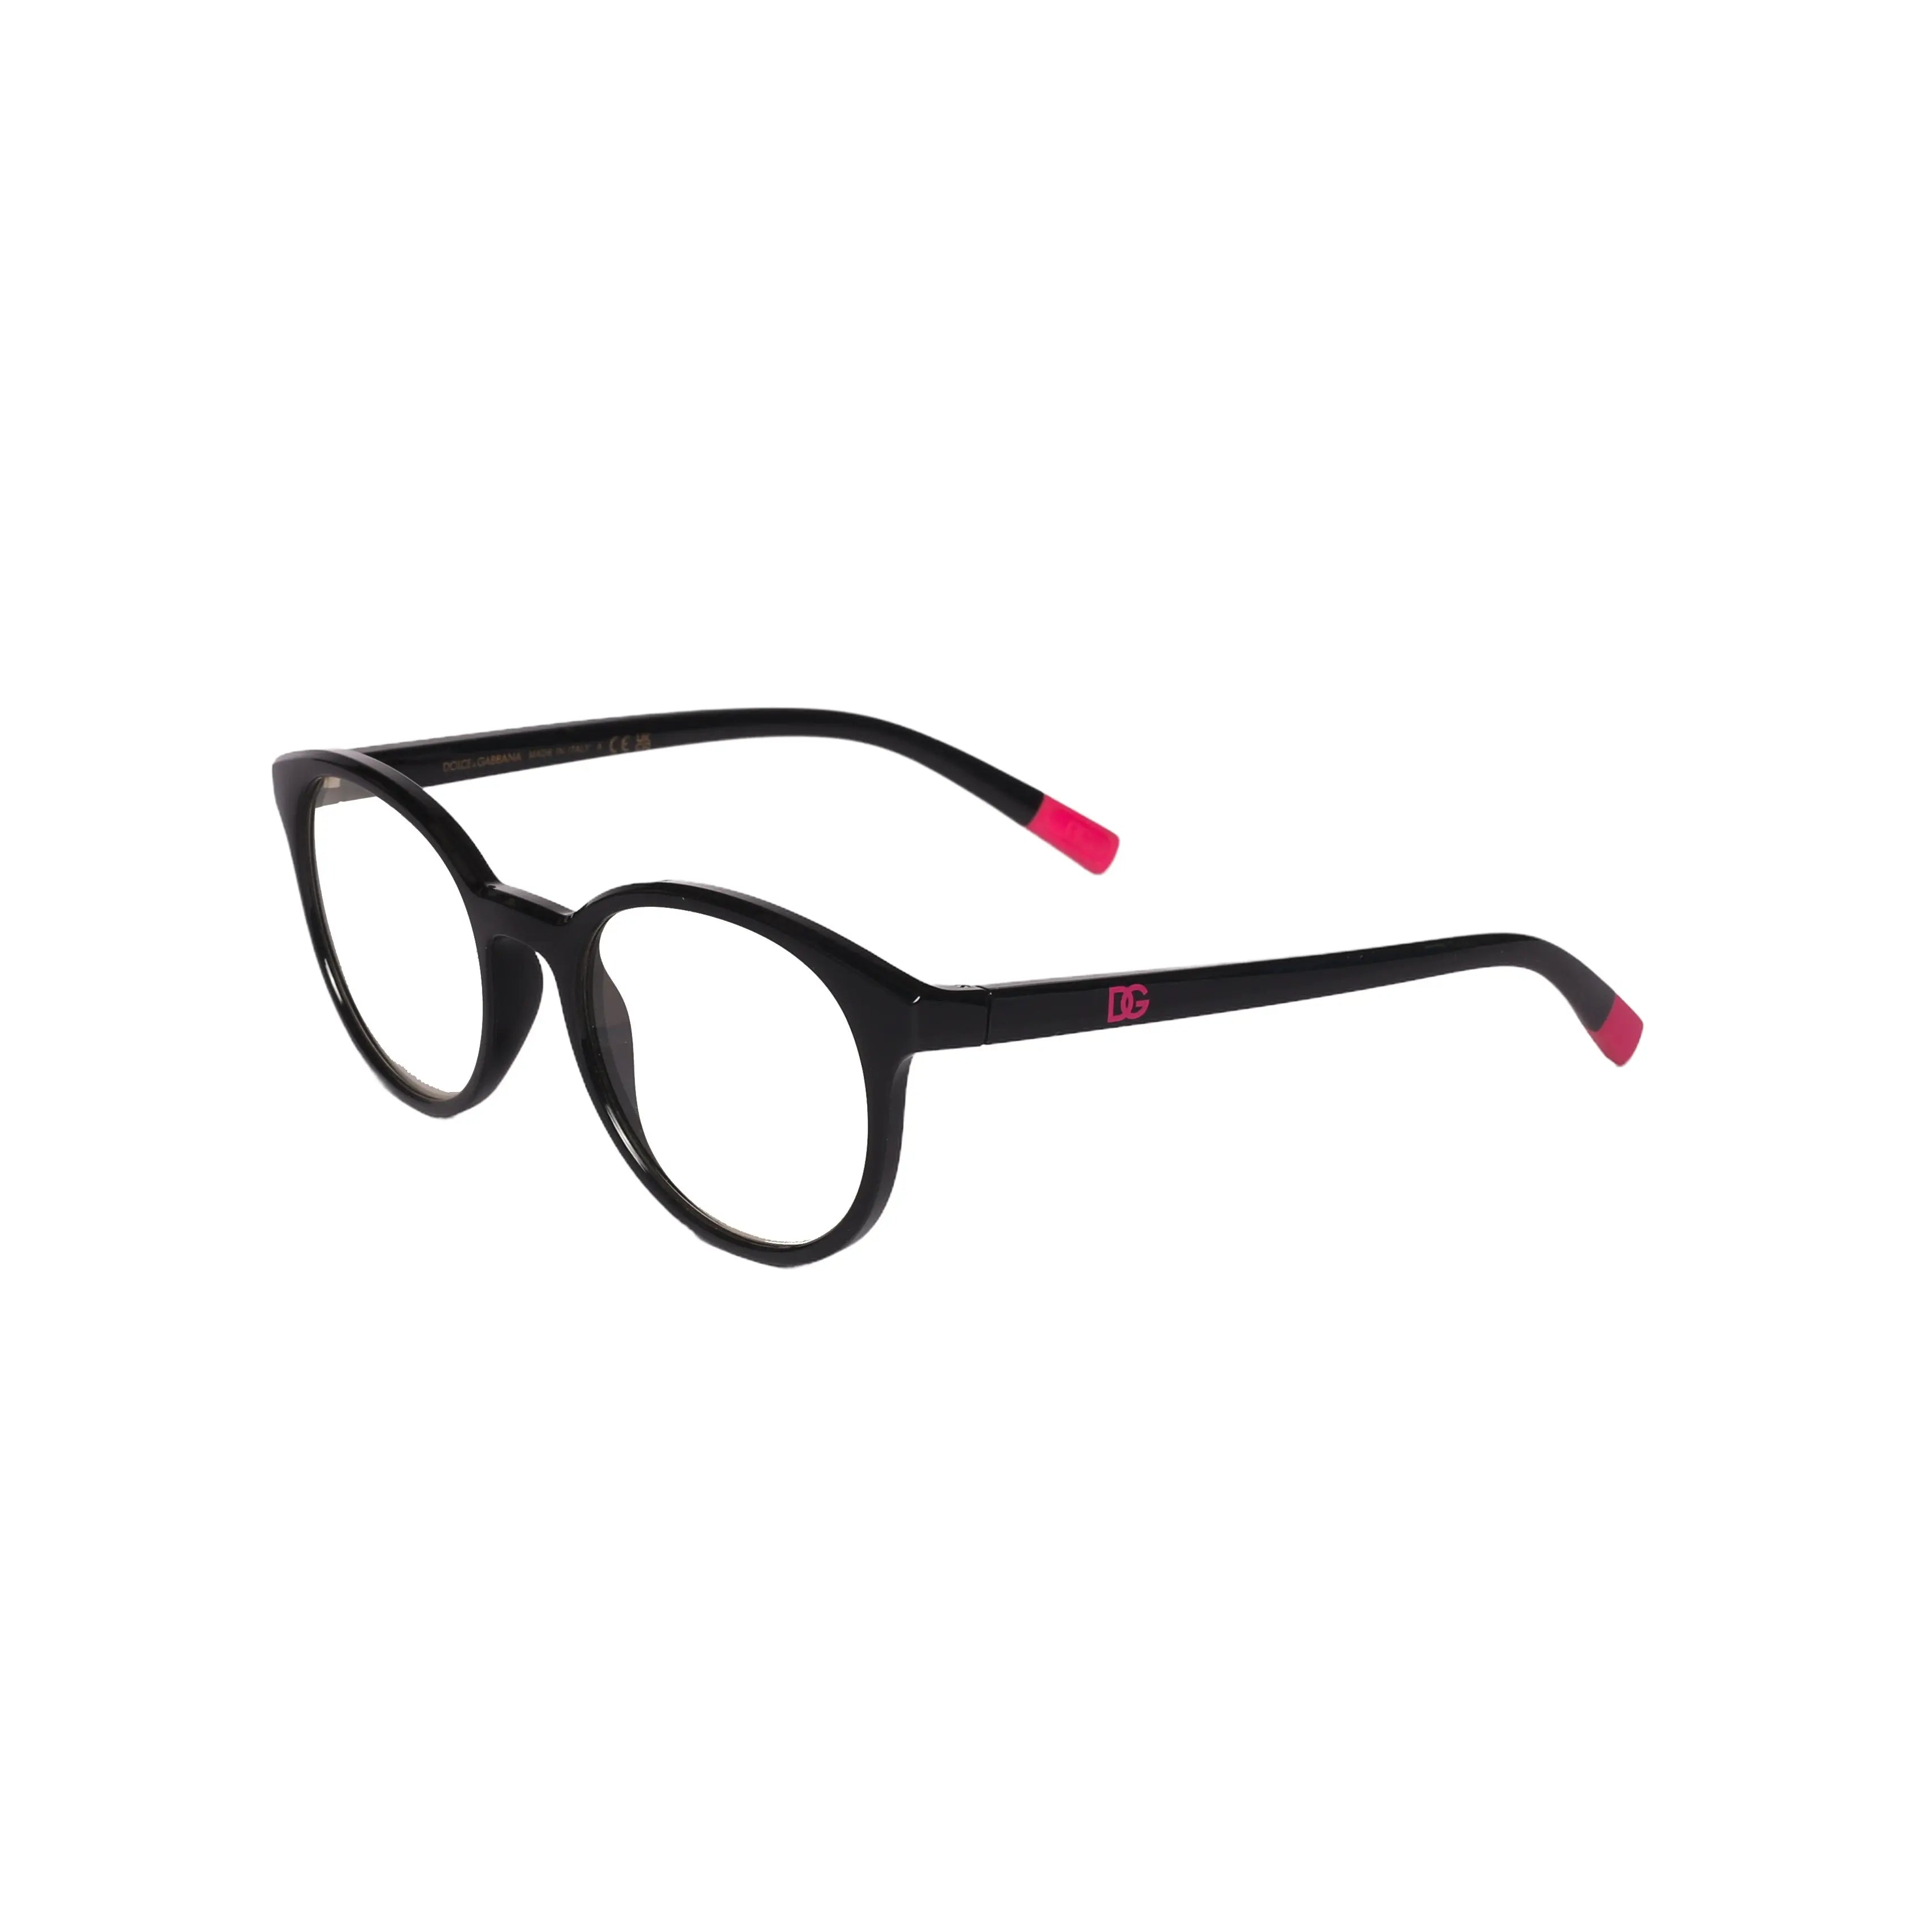 Dolce & Gabbana (D&G) DG 5093-51-501 EyeglassesRediscover the world in vivid color and clarity with these Dolce &amp; Gabbana (D&amp;G) DG 5093-51-501 Eyeglasses. The classic yet modern design offers a timeless, Eyeglasses